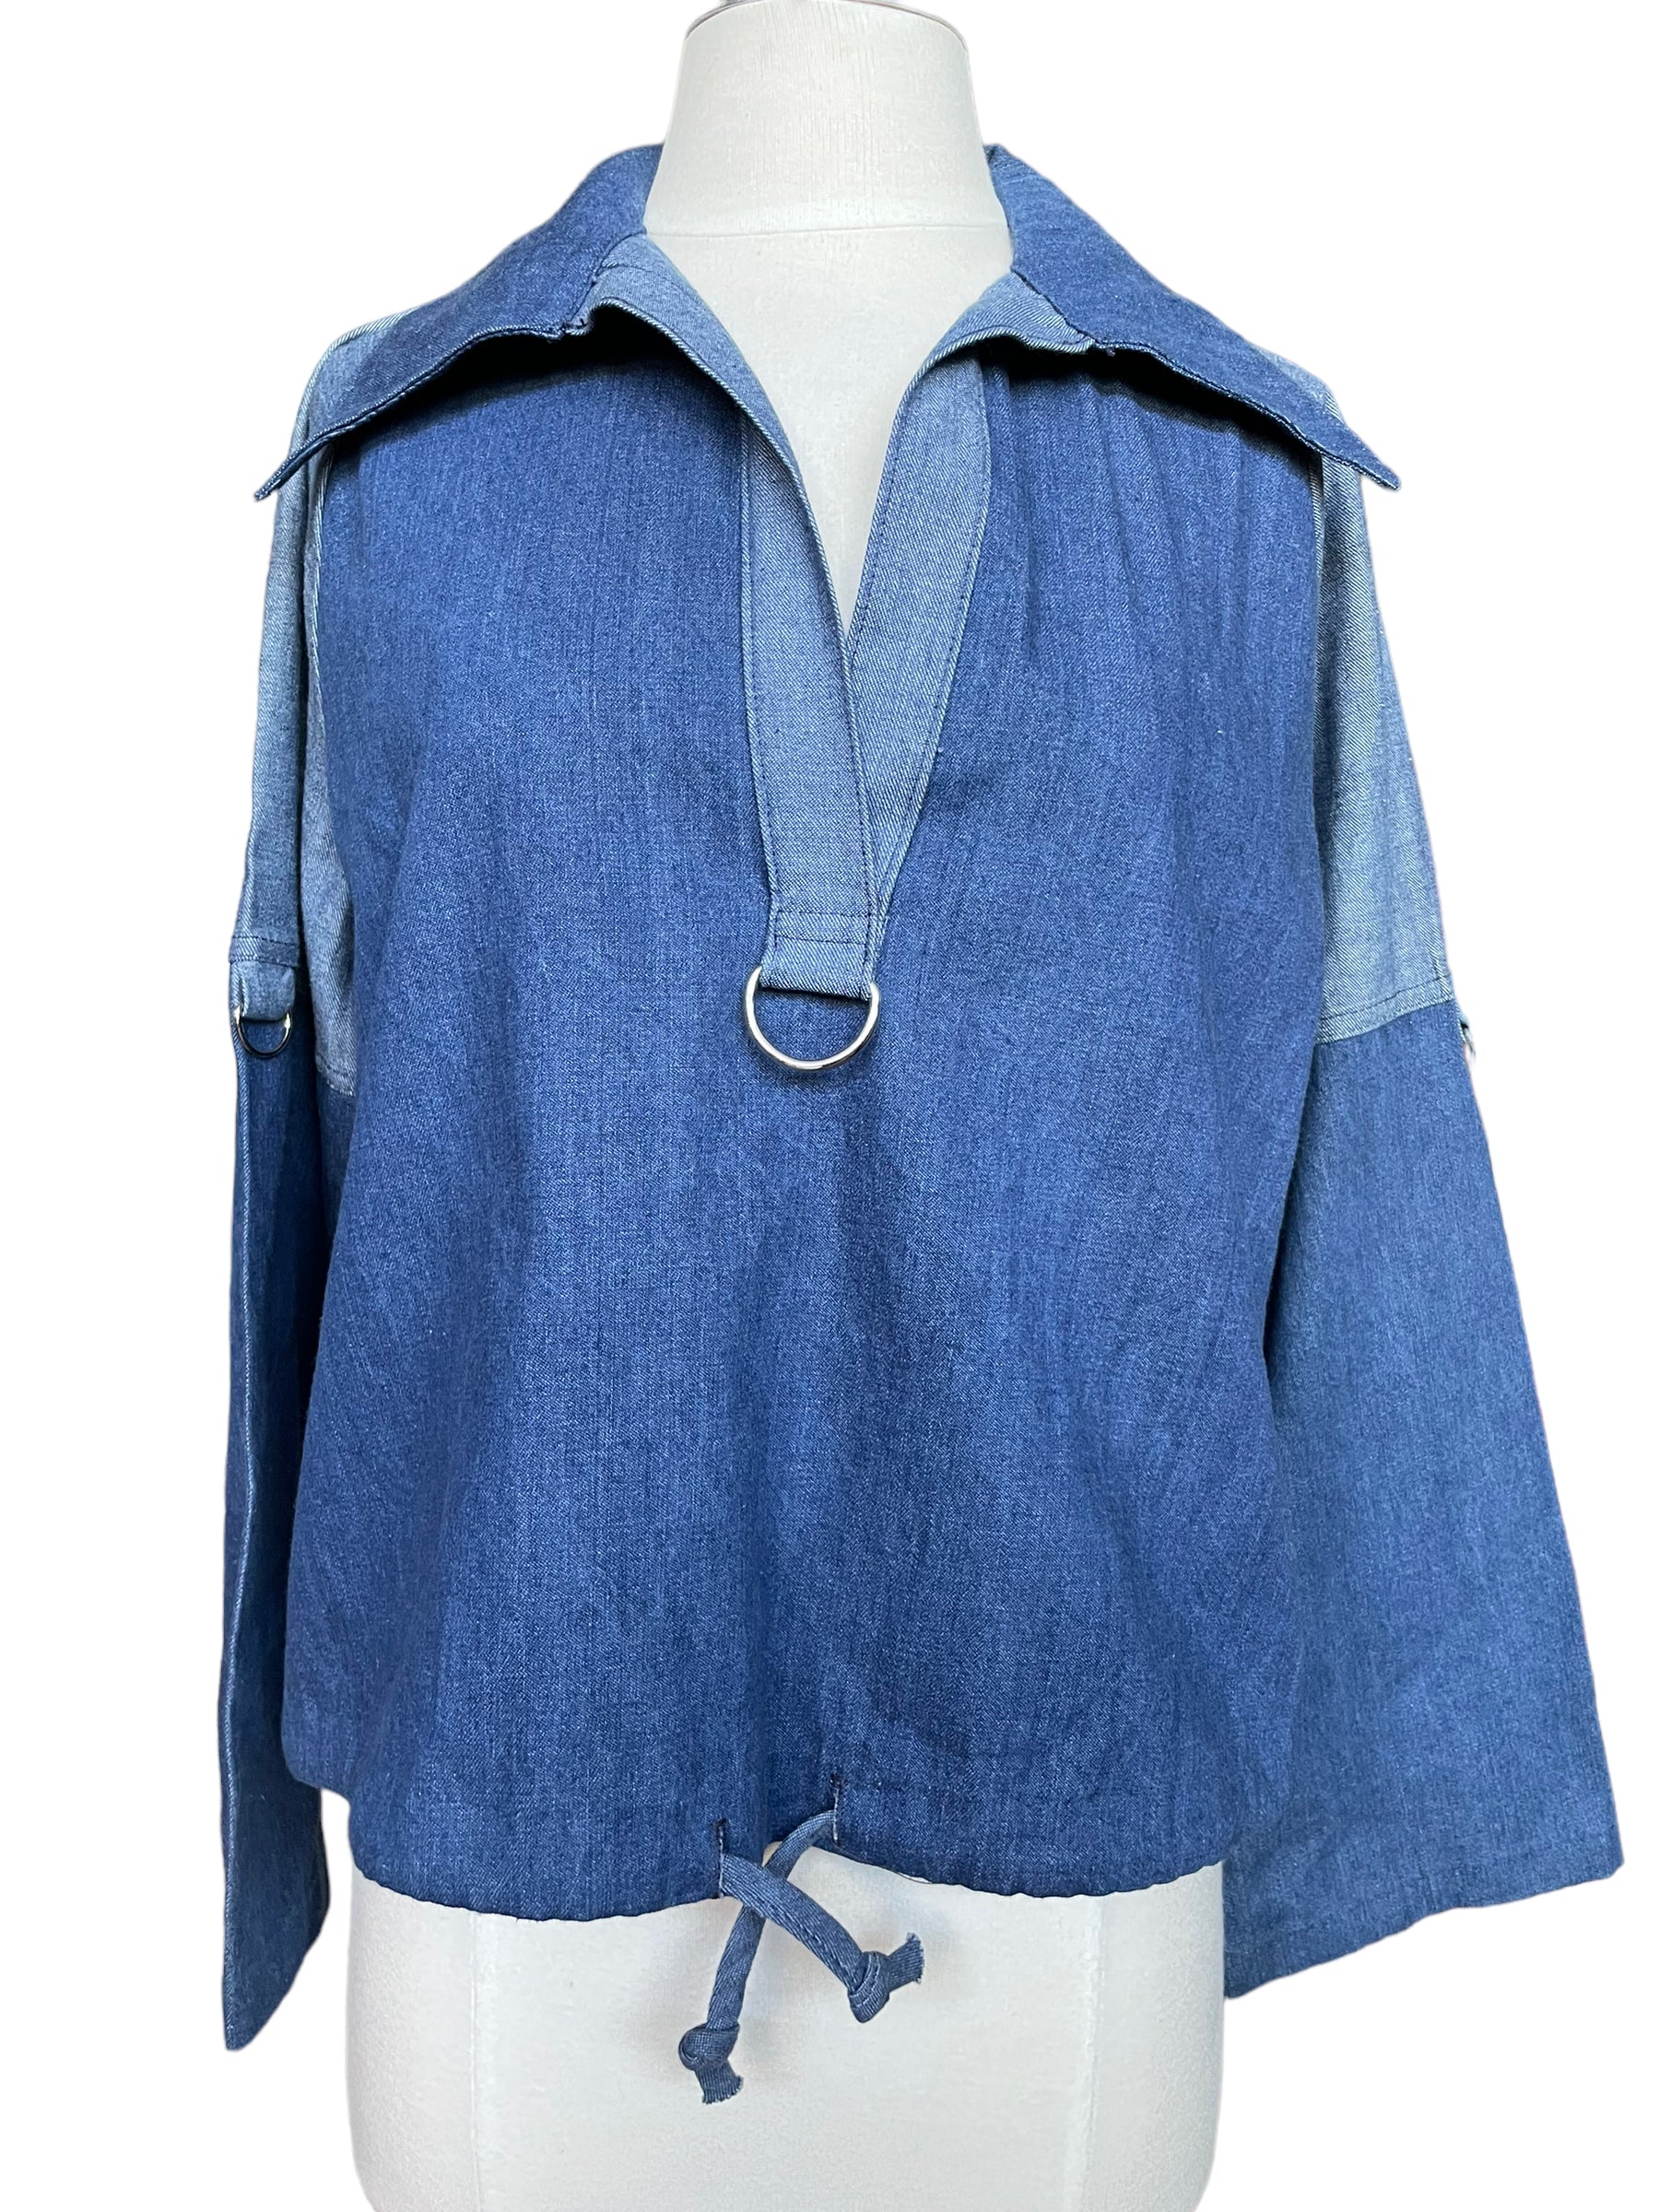 Full front view of Vintage 1970s Pacific Play Togs Denim Pull Over | Vintage Shirts & Tops | Barn Owl Vintage Seattle